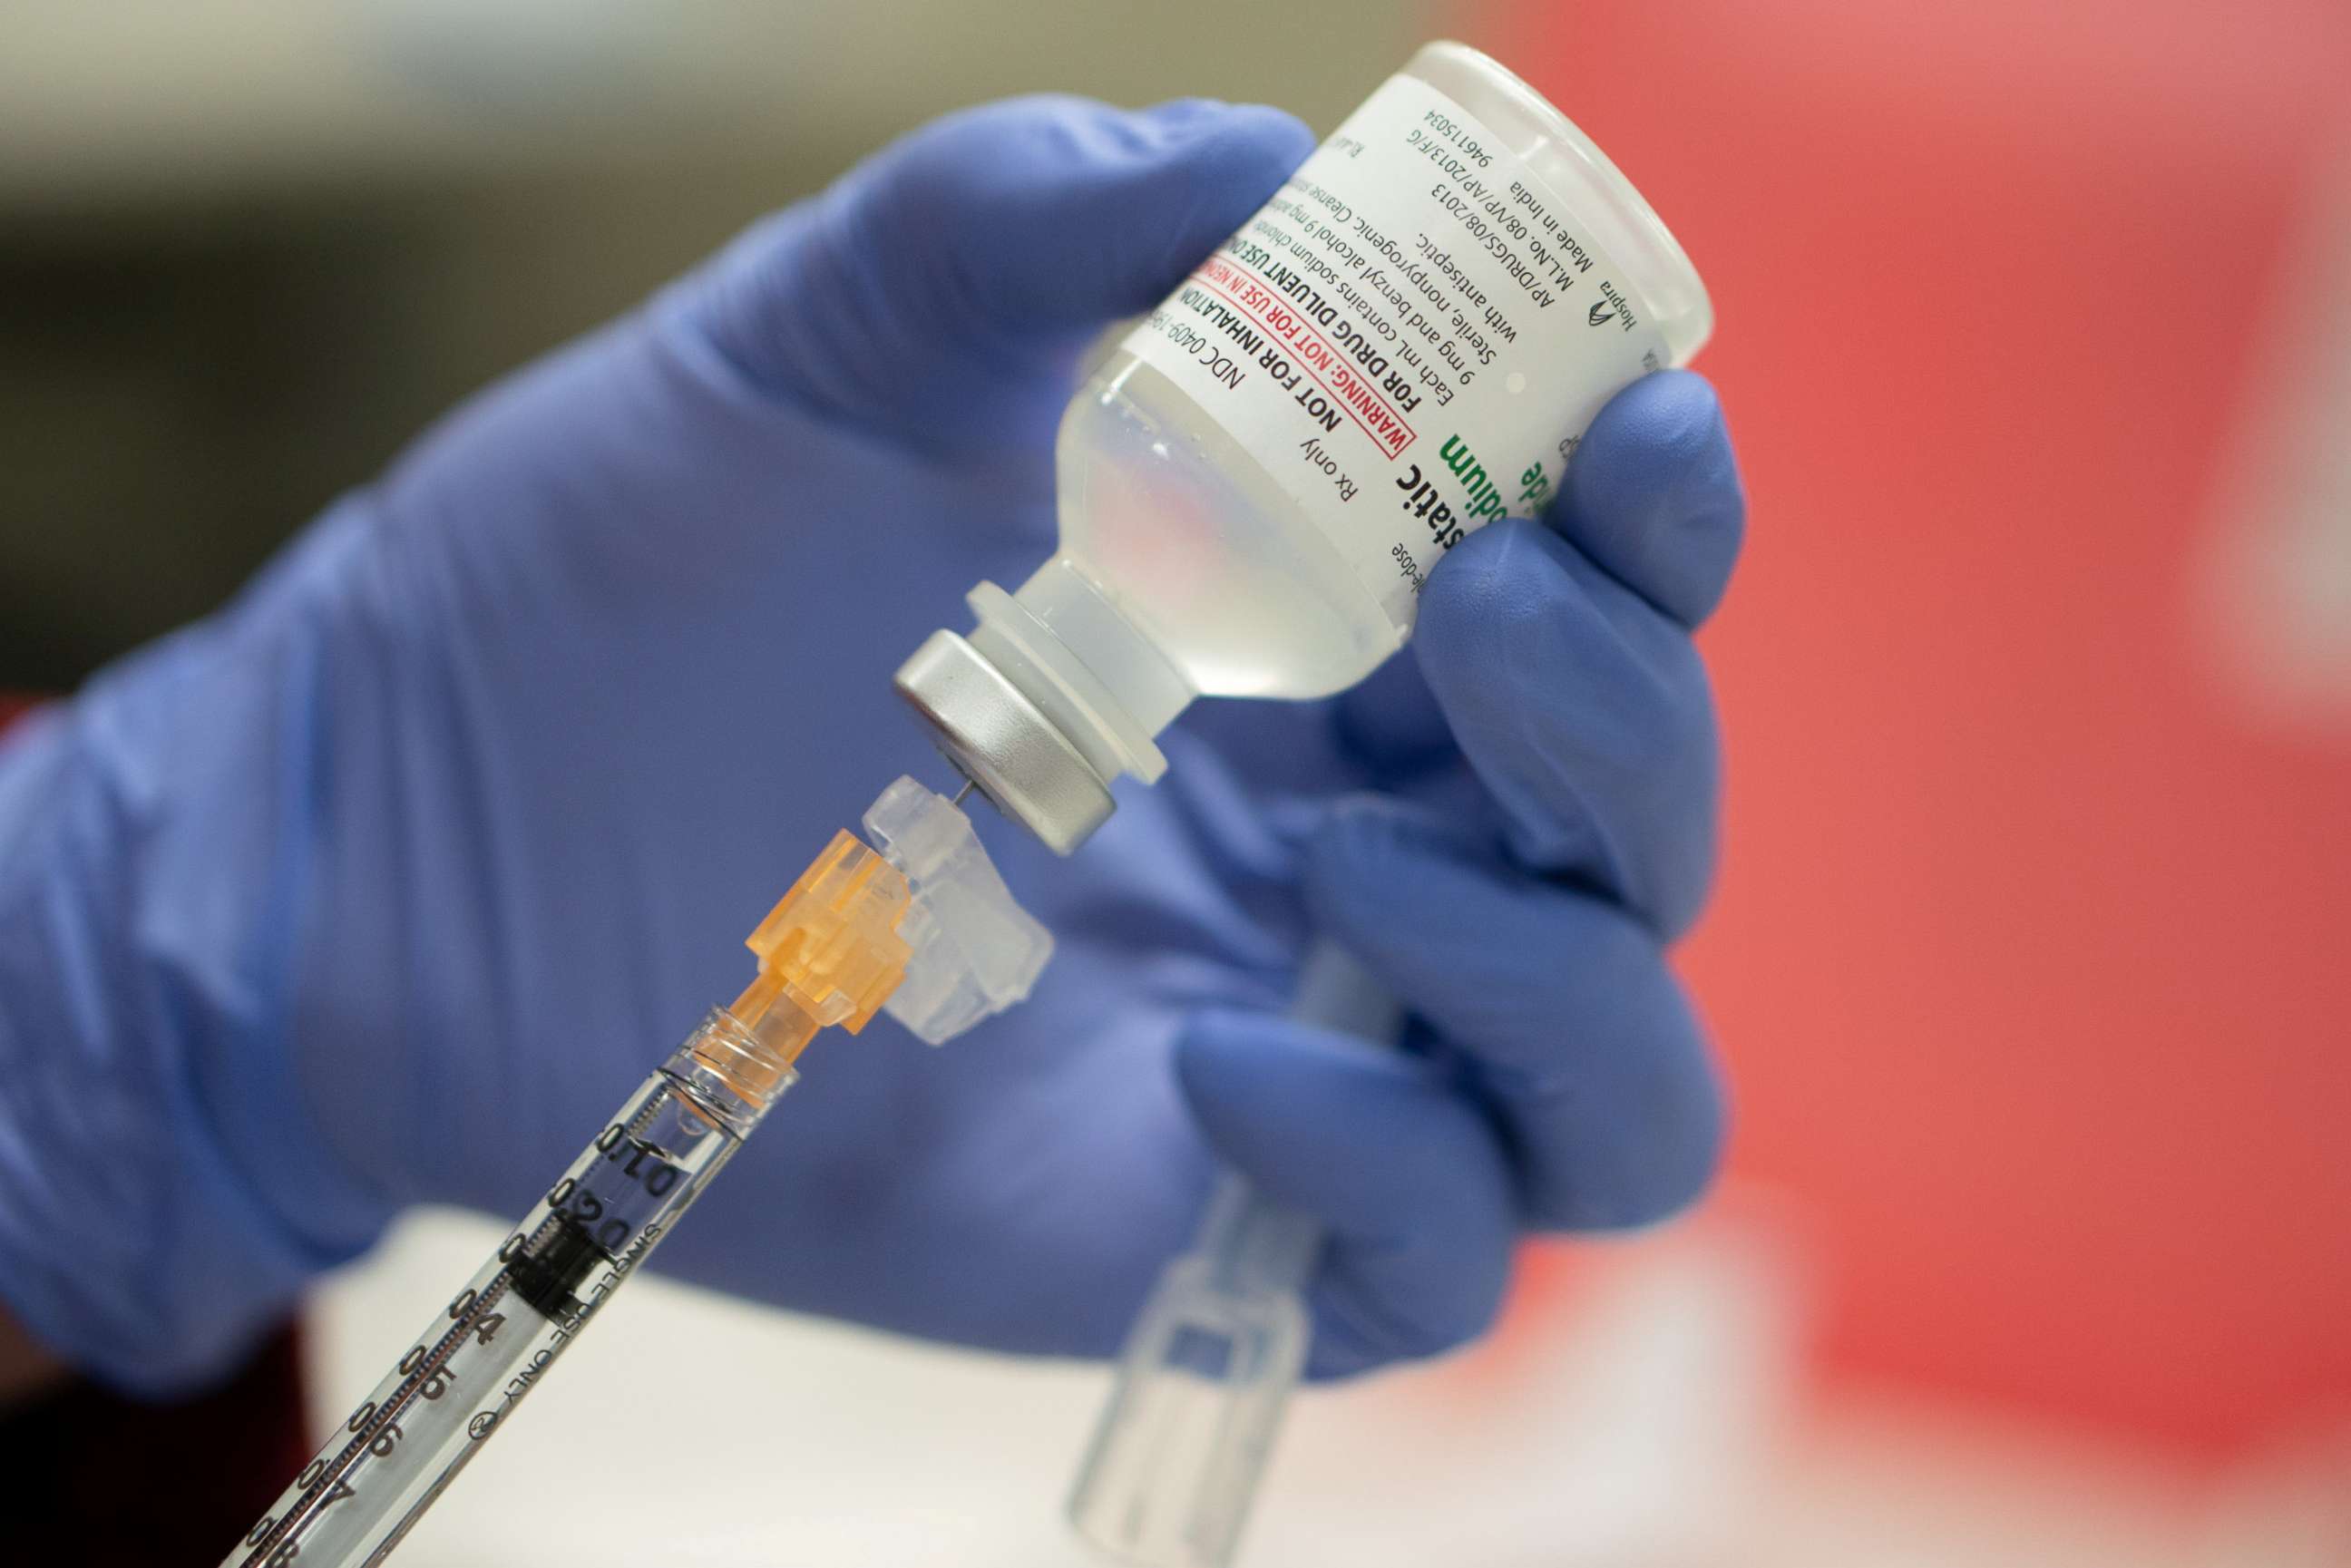 PHOTO: A mock vial of the Pfizer vaccine for the coronavirus disease (COVID-19) is shown during a staff vaccine training session at UW Health in Madison, Wisconsin, U.S., Dec. 8, 2020.